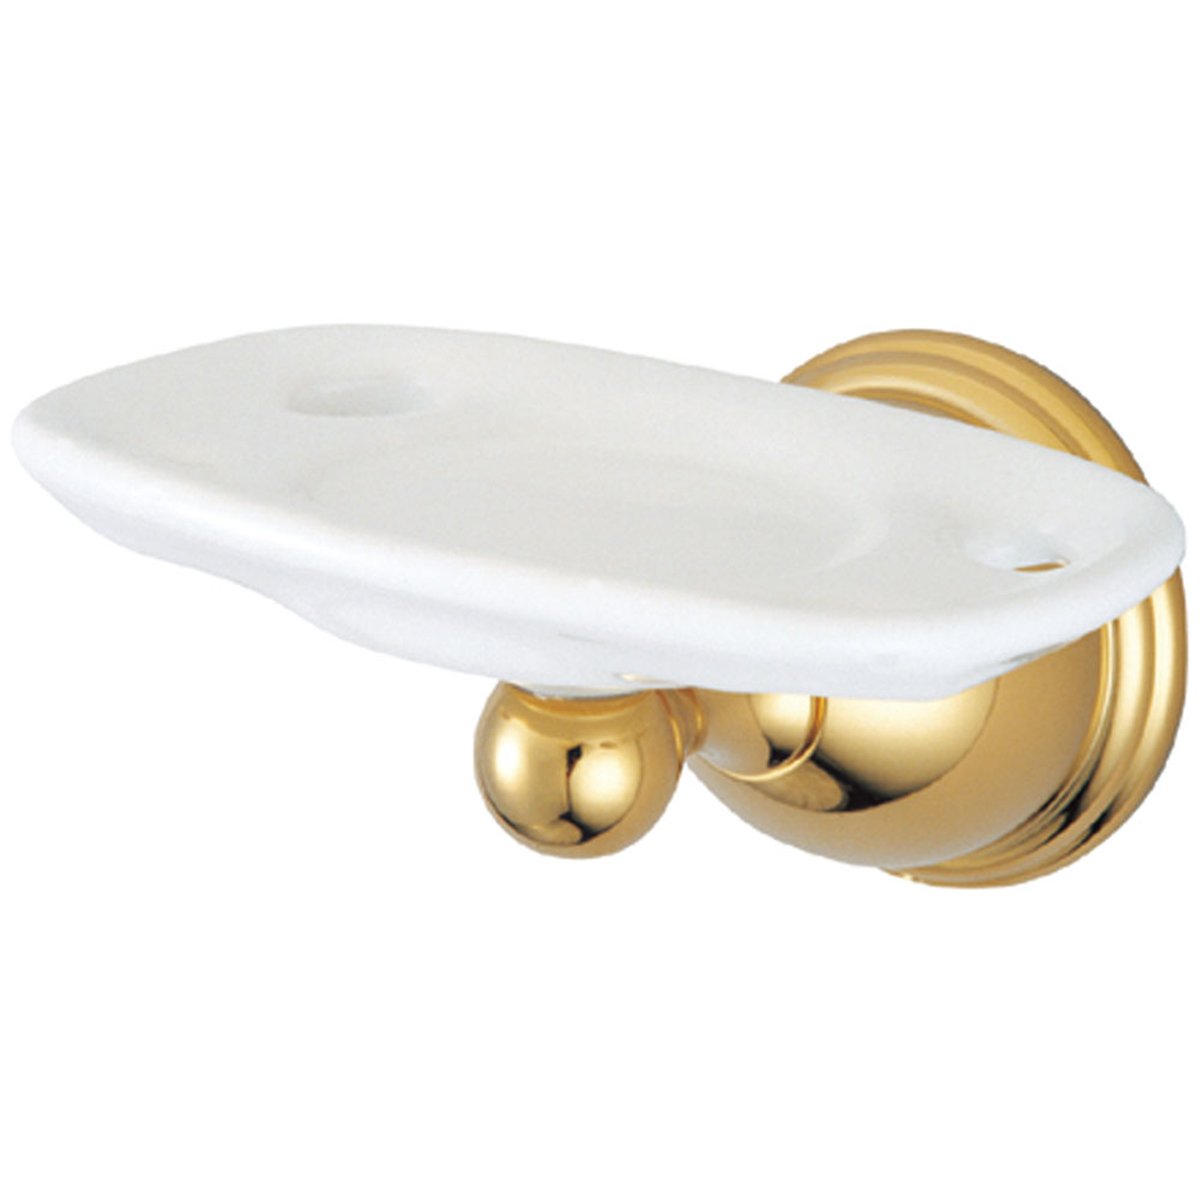 Kingston Brass Restoration Wall Mount Toothbrush and Tumbler Holder-Bathroom Accessories-Free Shipping-Directsinks.